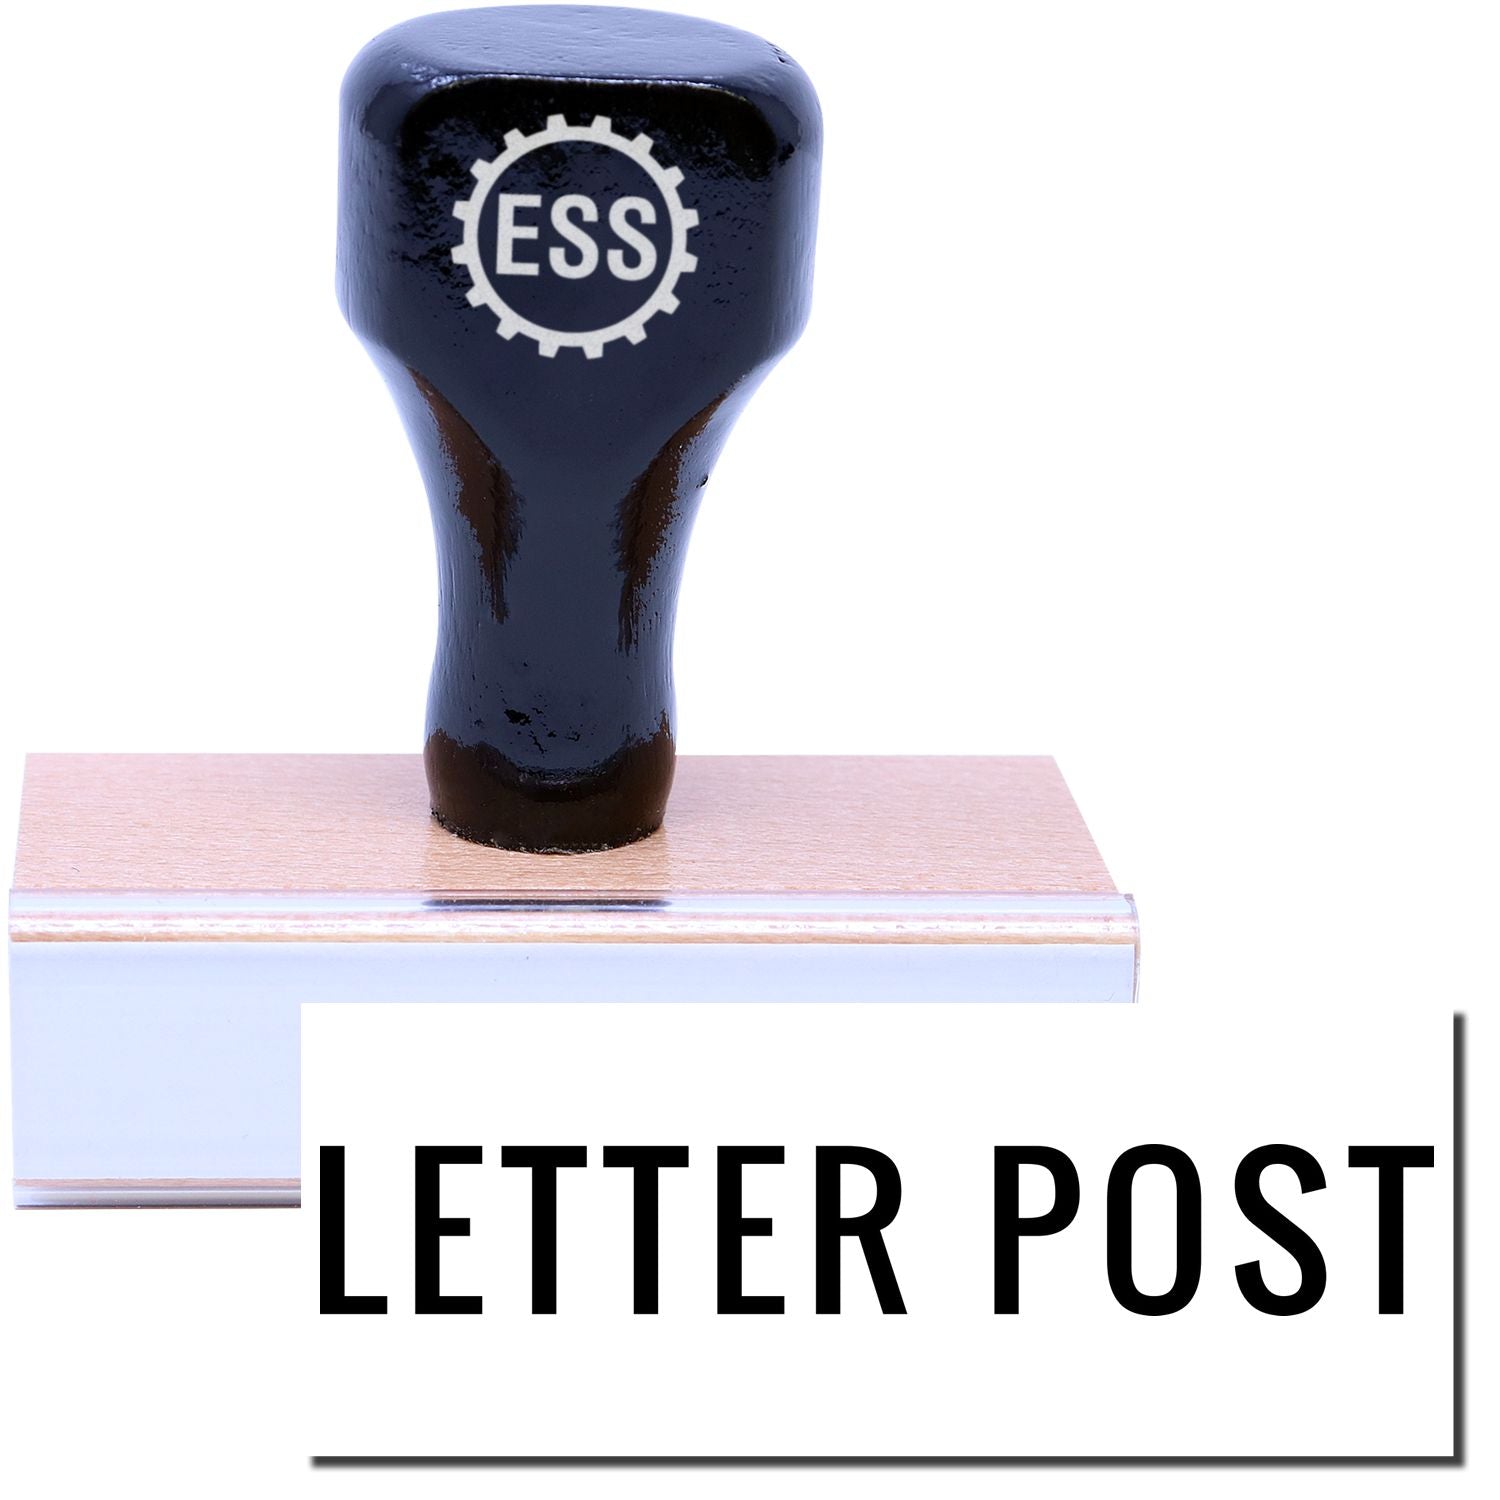 A stock office rubber stamp with a stamped image showing how the text "LETTER POST" in a large font is displayed after stamping.